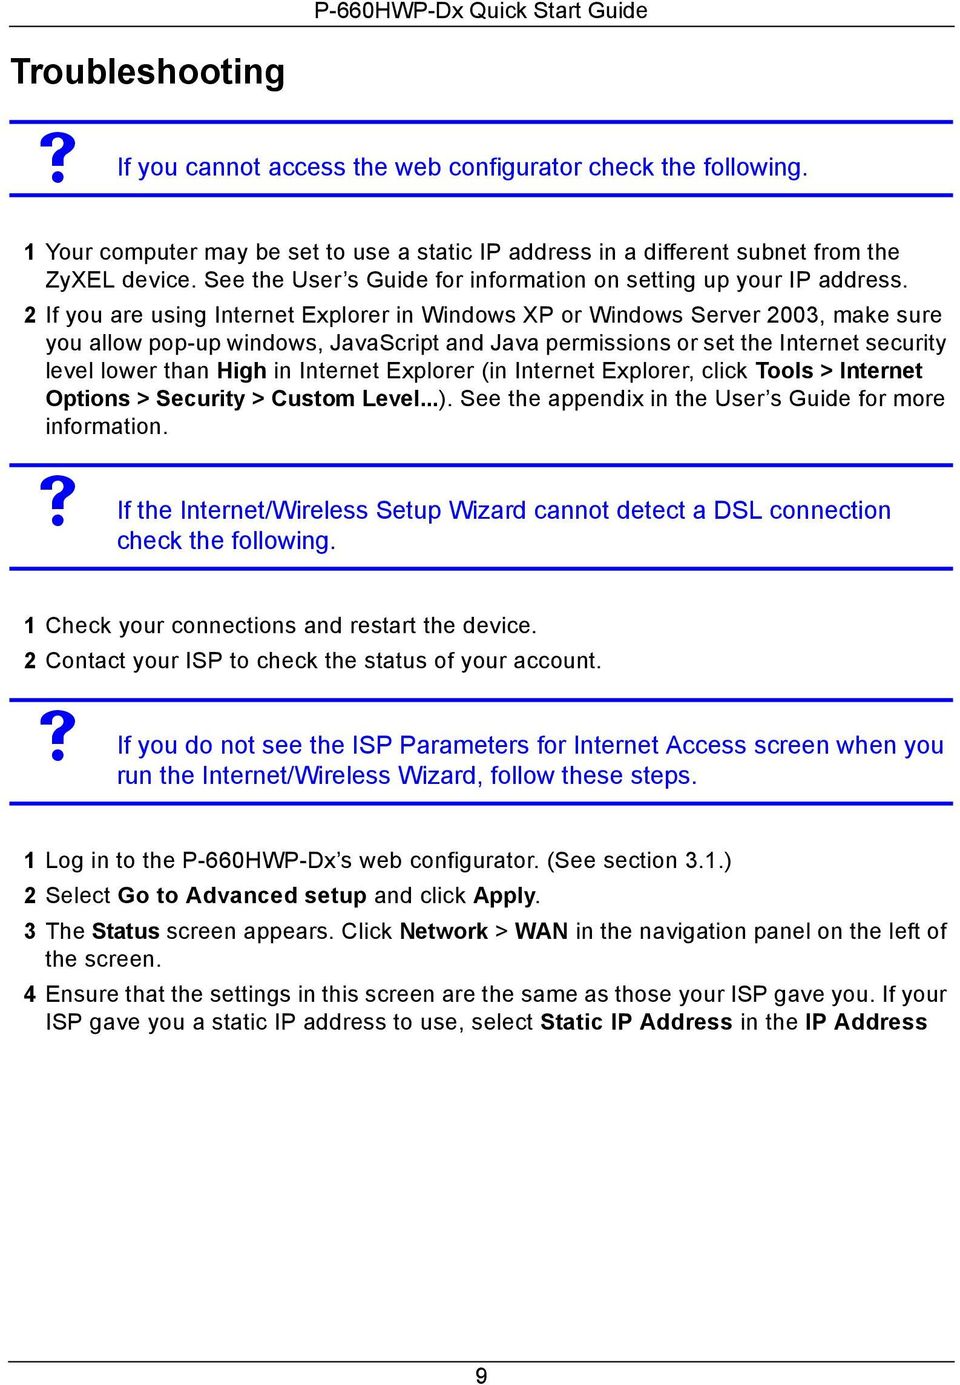 2 If you are using Internet Explorer in Windows XP or Windows Server 2003, make sure you allow pop-up windows, JavaScript and Java permissions or set the Internet security level lower than High in